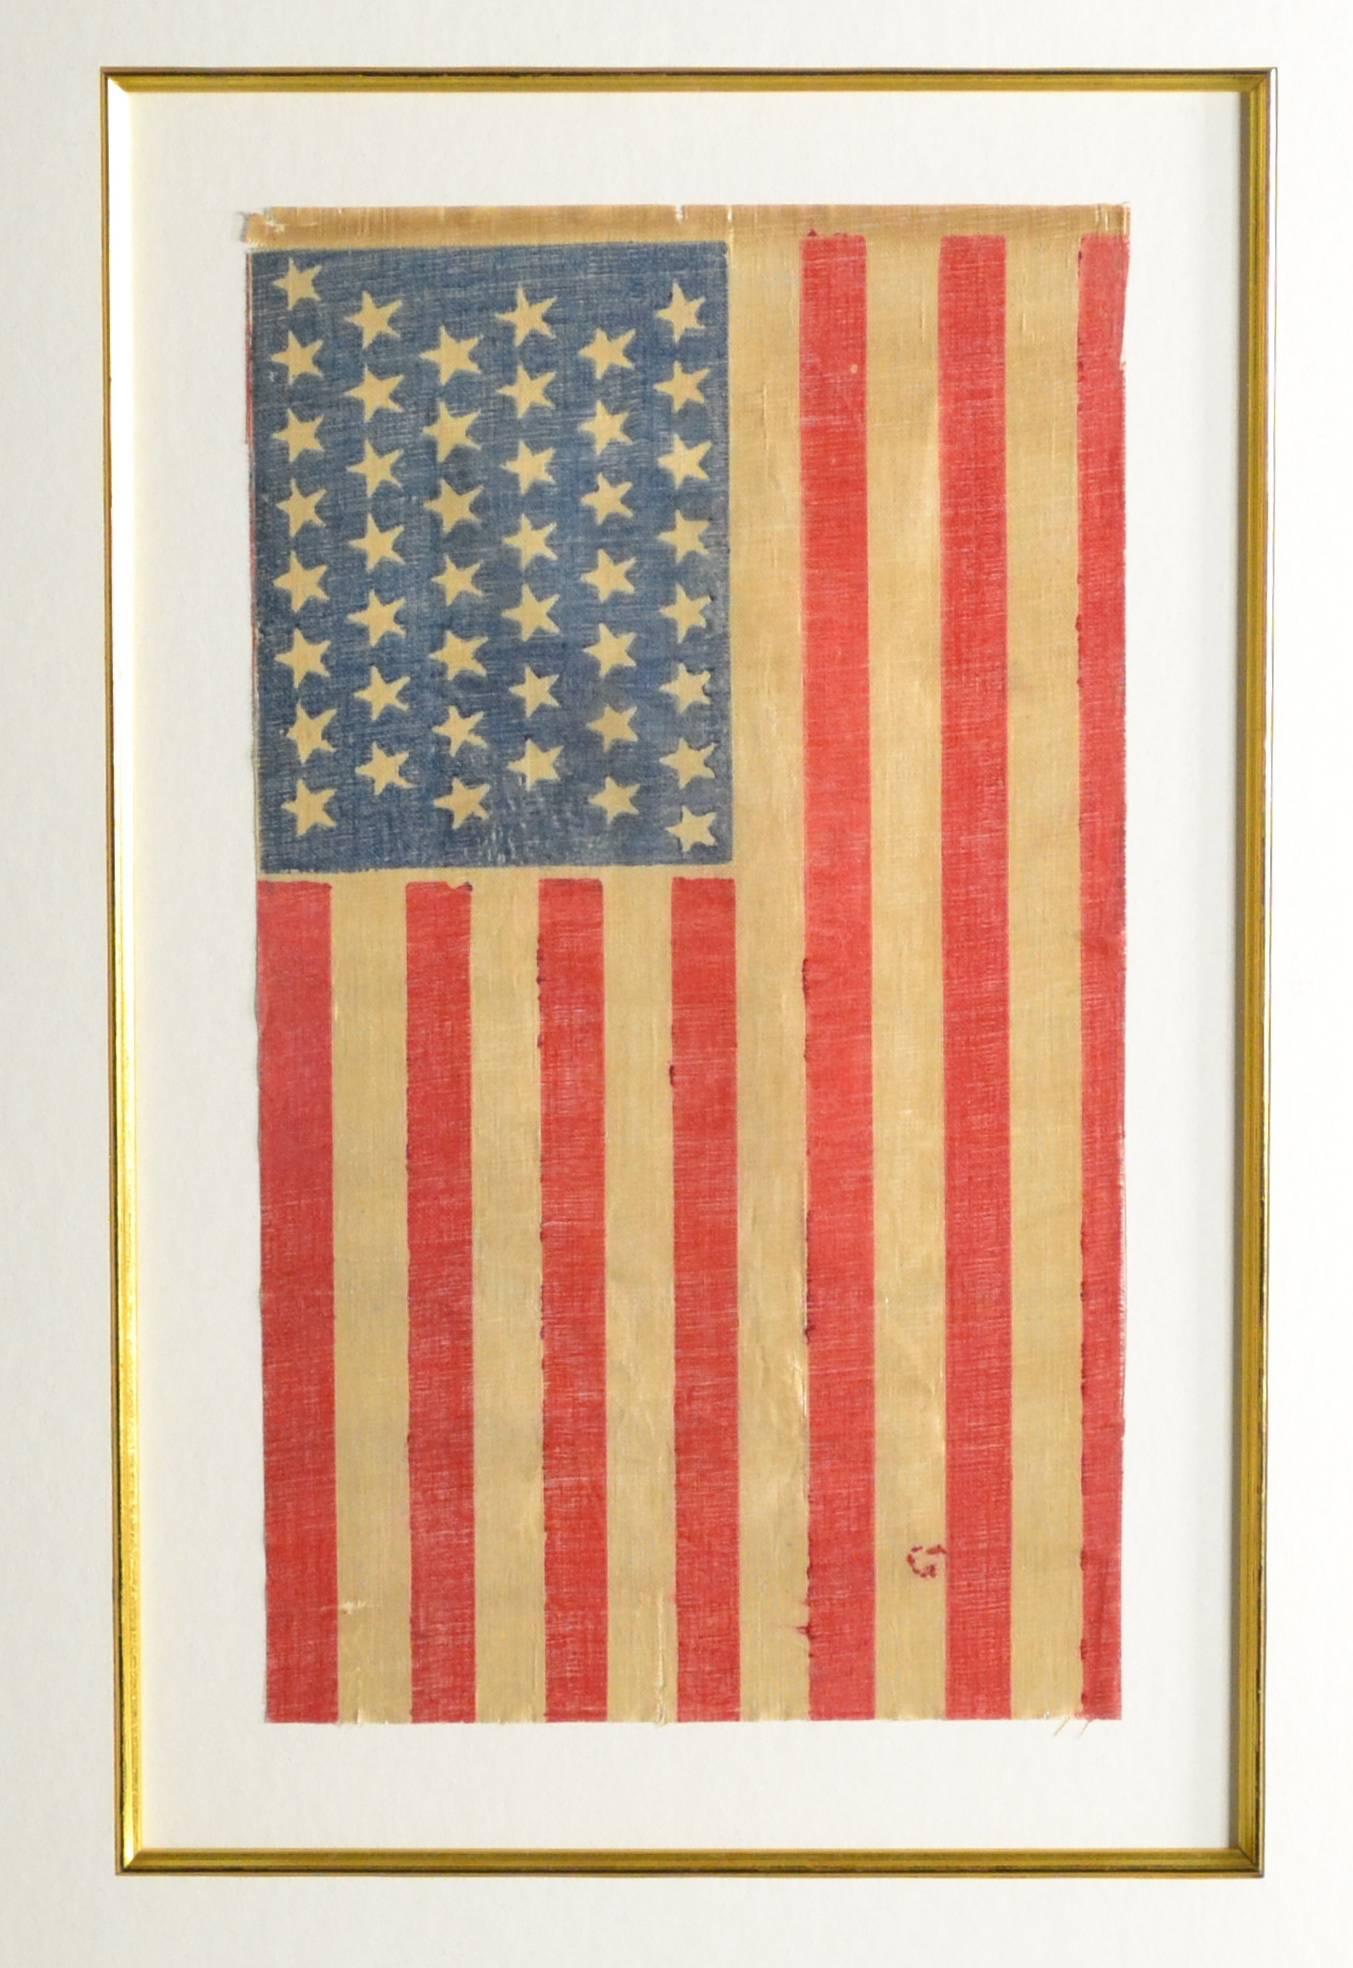 Great looking antique 44 star flag from 1890. Double sided flag. We framed it to hang vertical, the canton (blue part) always must be at the top left of any hanging flag. Made of a starched linen fabric. Grover Cleveland was President. Measures: